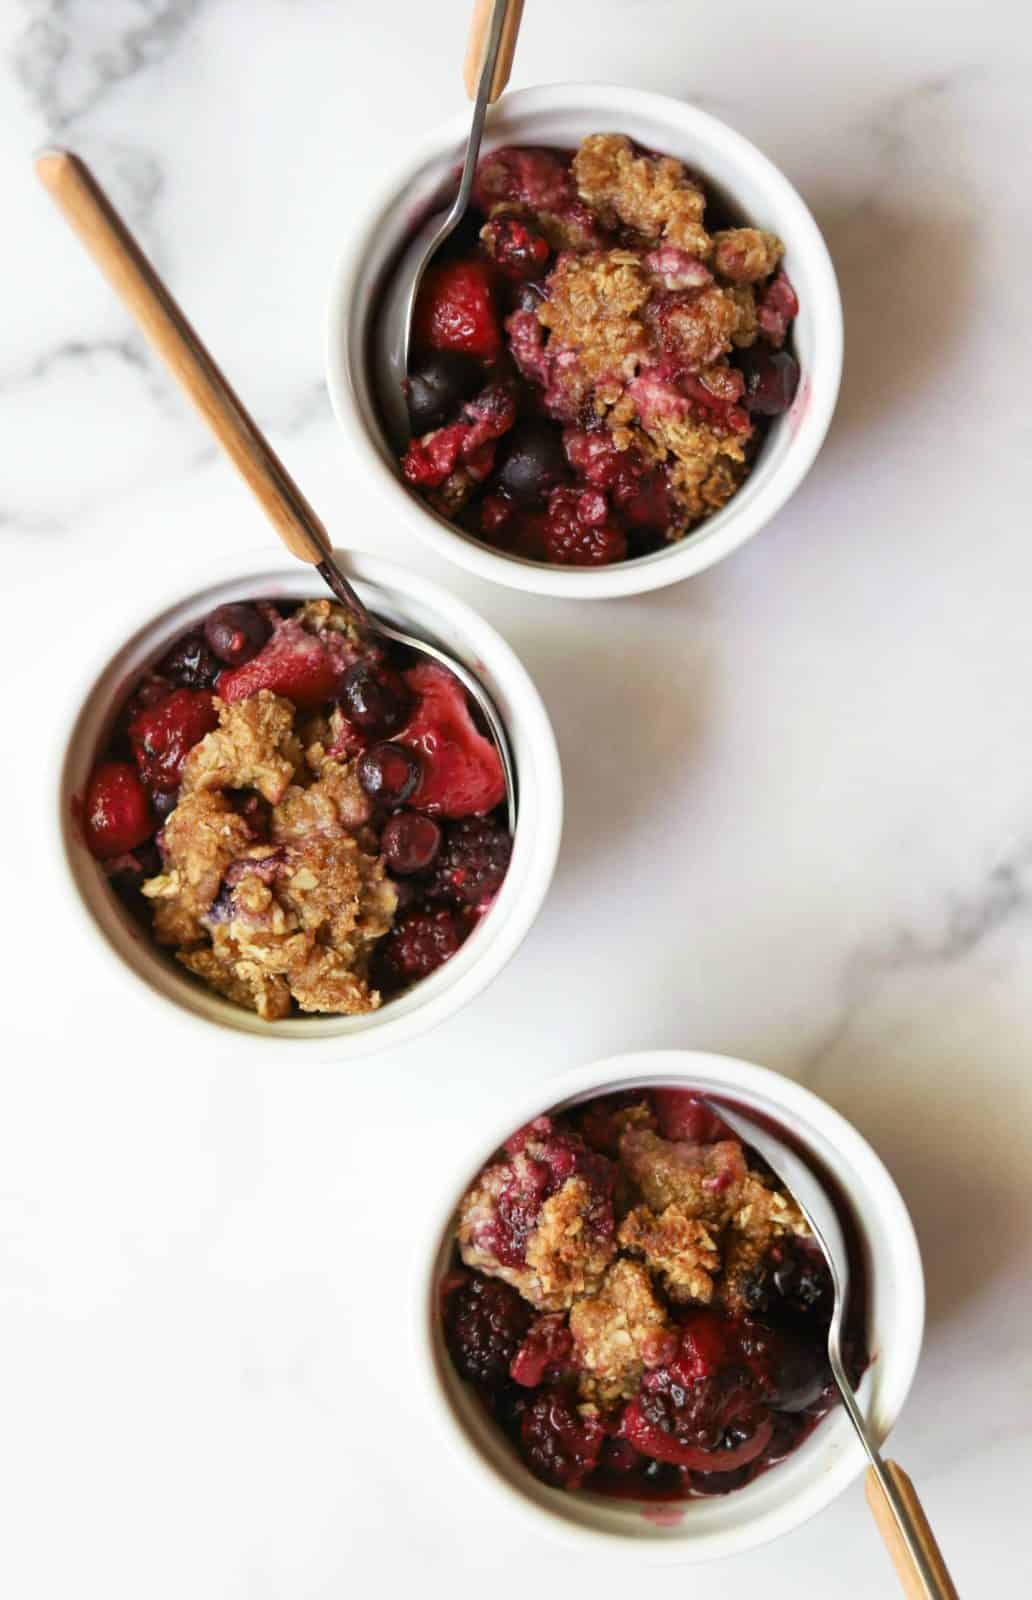 Mixed berry crisp in white dishes with spoons